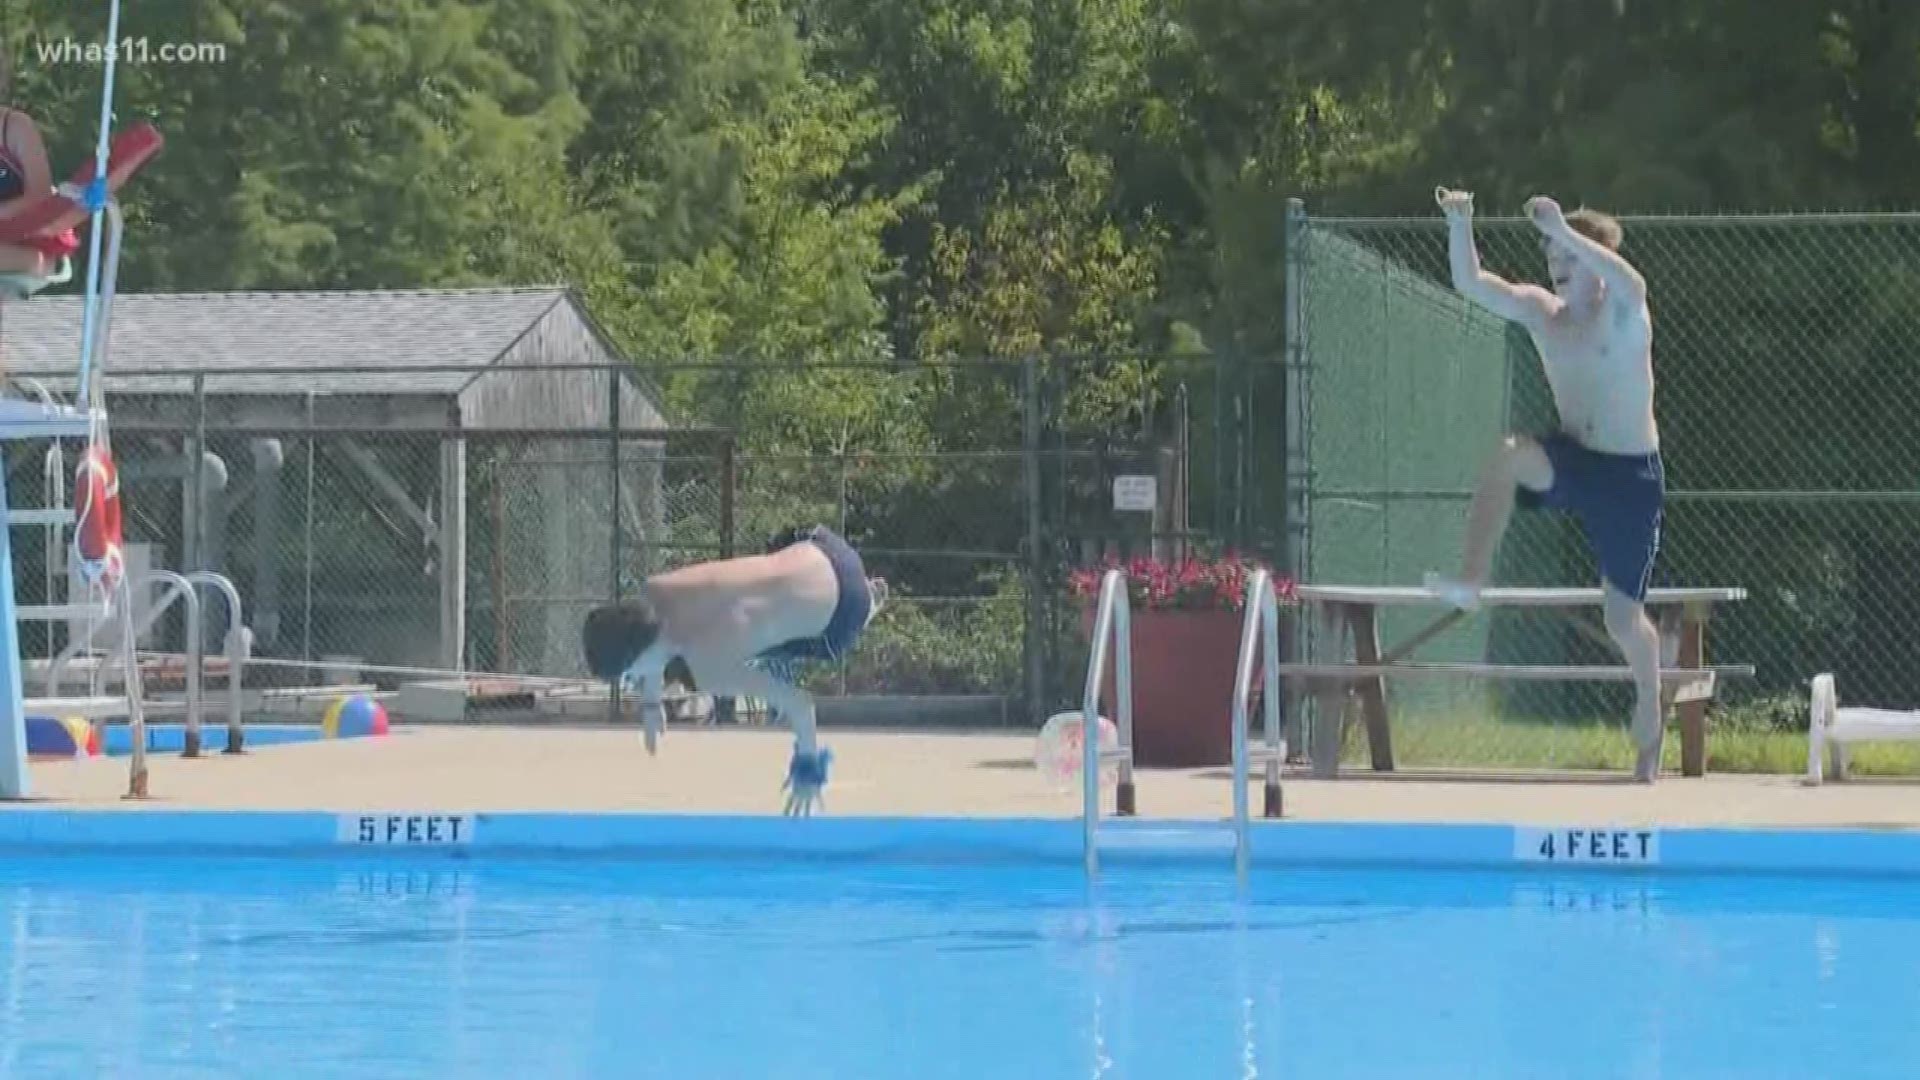 Louisville Parks and Recreation showcased a new pool they hope will put Louisville on the map.